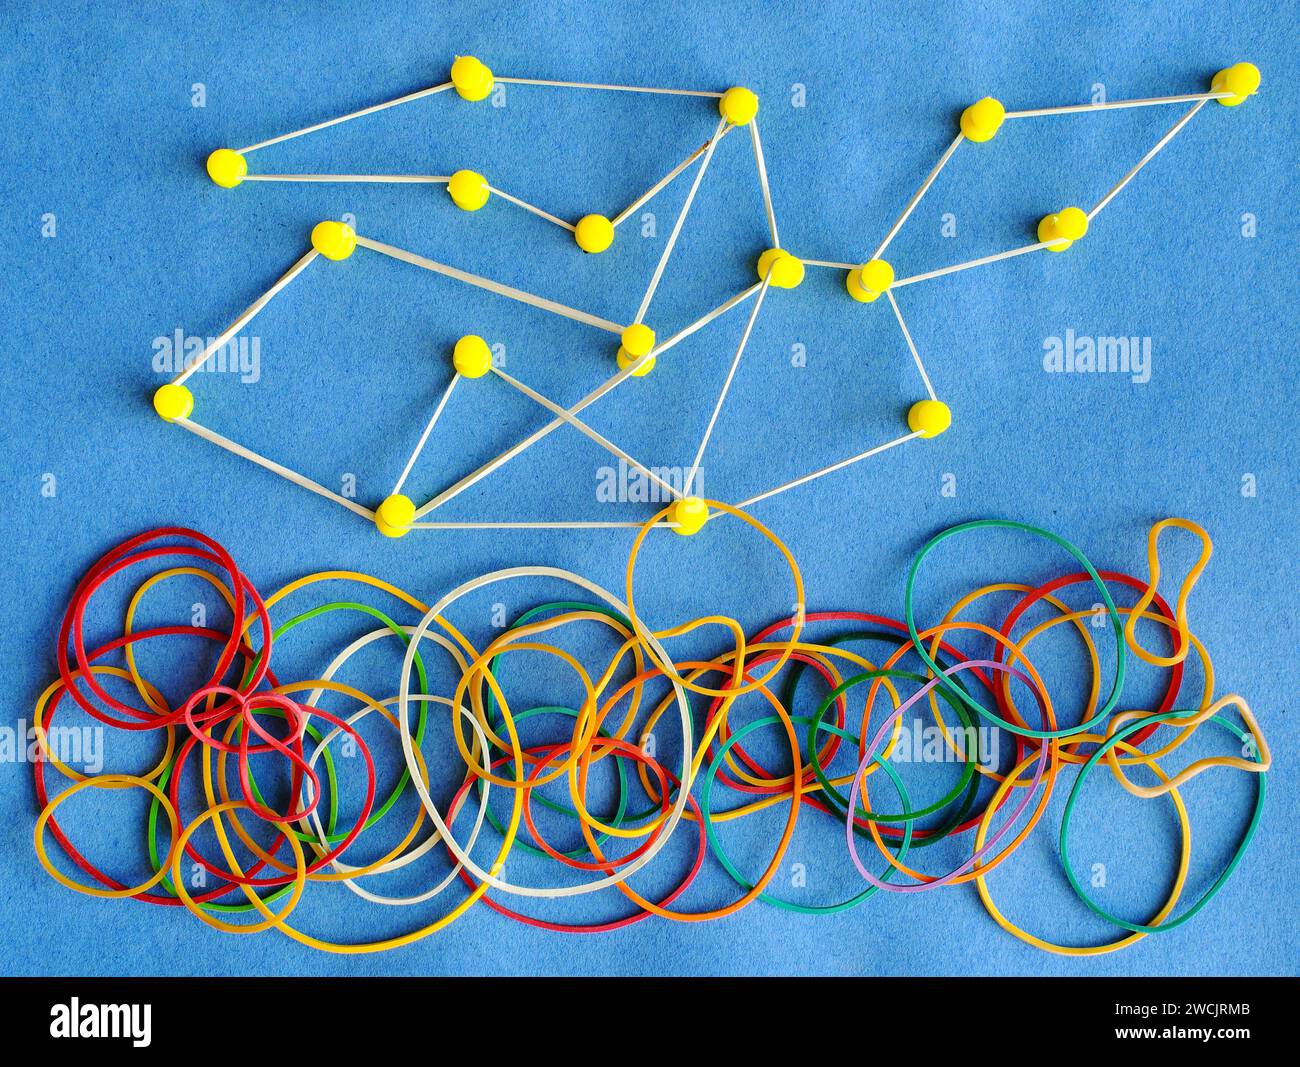 Business concept, networking,innovation,idea,consulting, human resources and teamwork concept with messy heap of rubber bands, but some forming networ Stock Photo